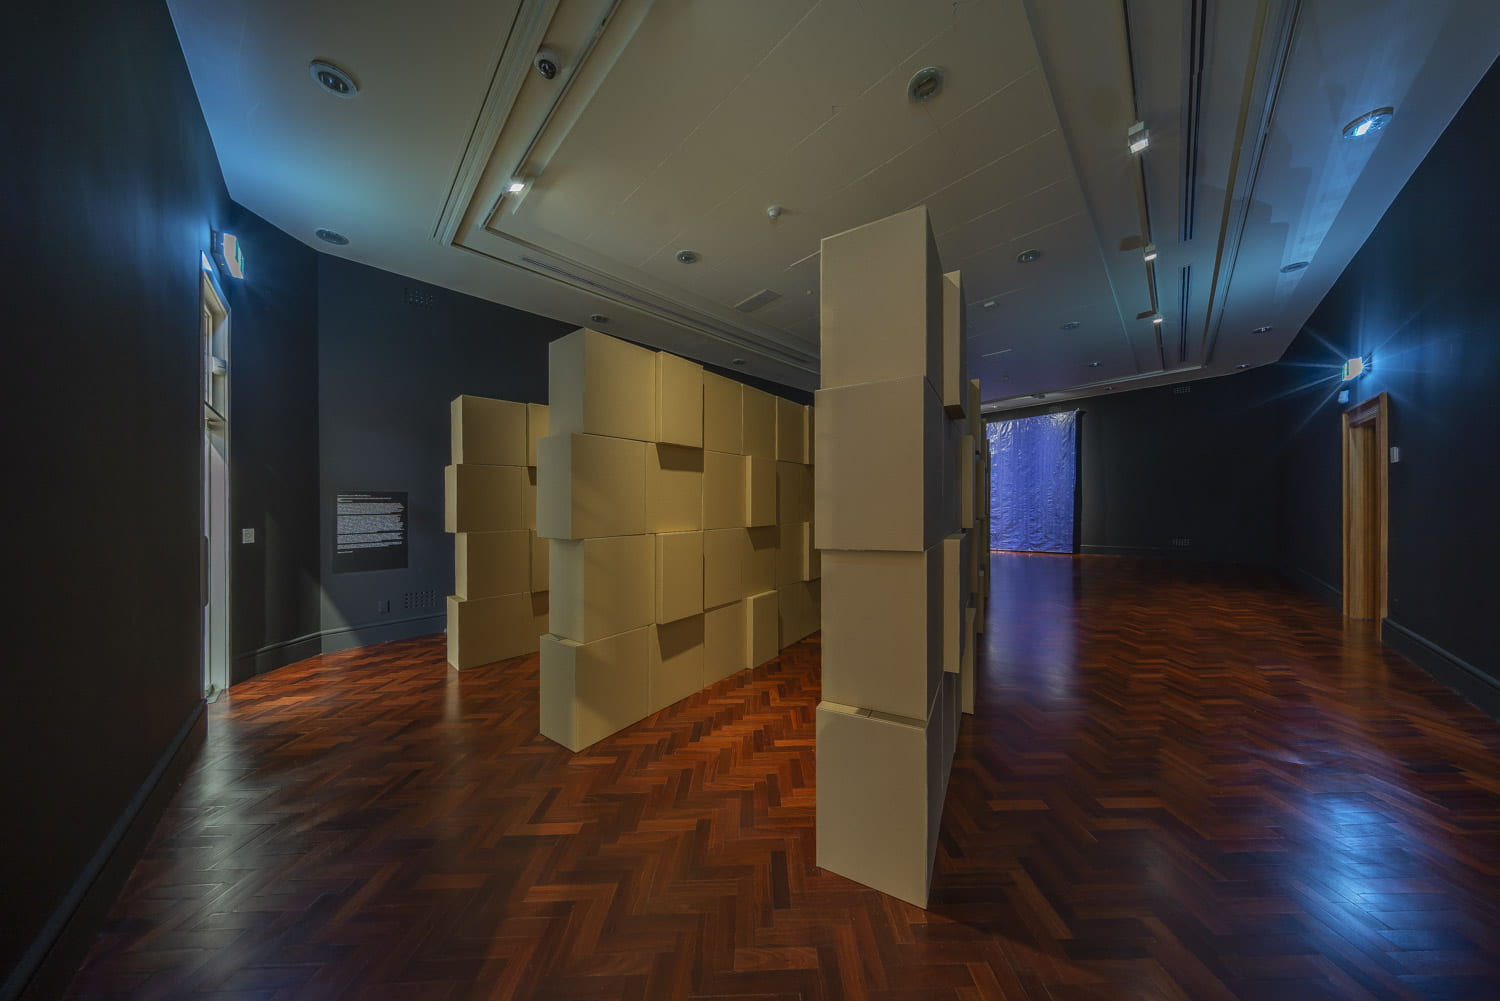 A room with three rows of stacked cardboard boxes arranged in a v-shape, pointed towards a blue tarpaulin hanging on the back wall.